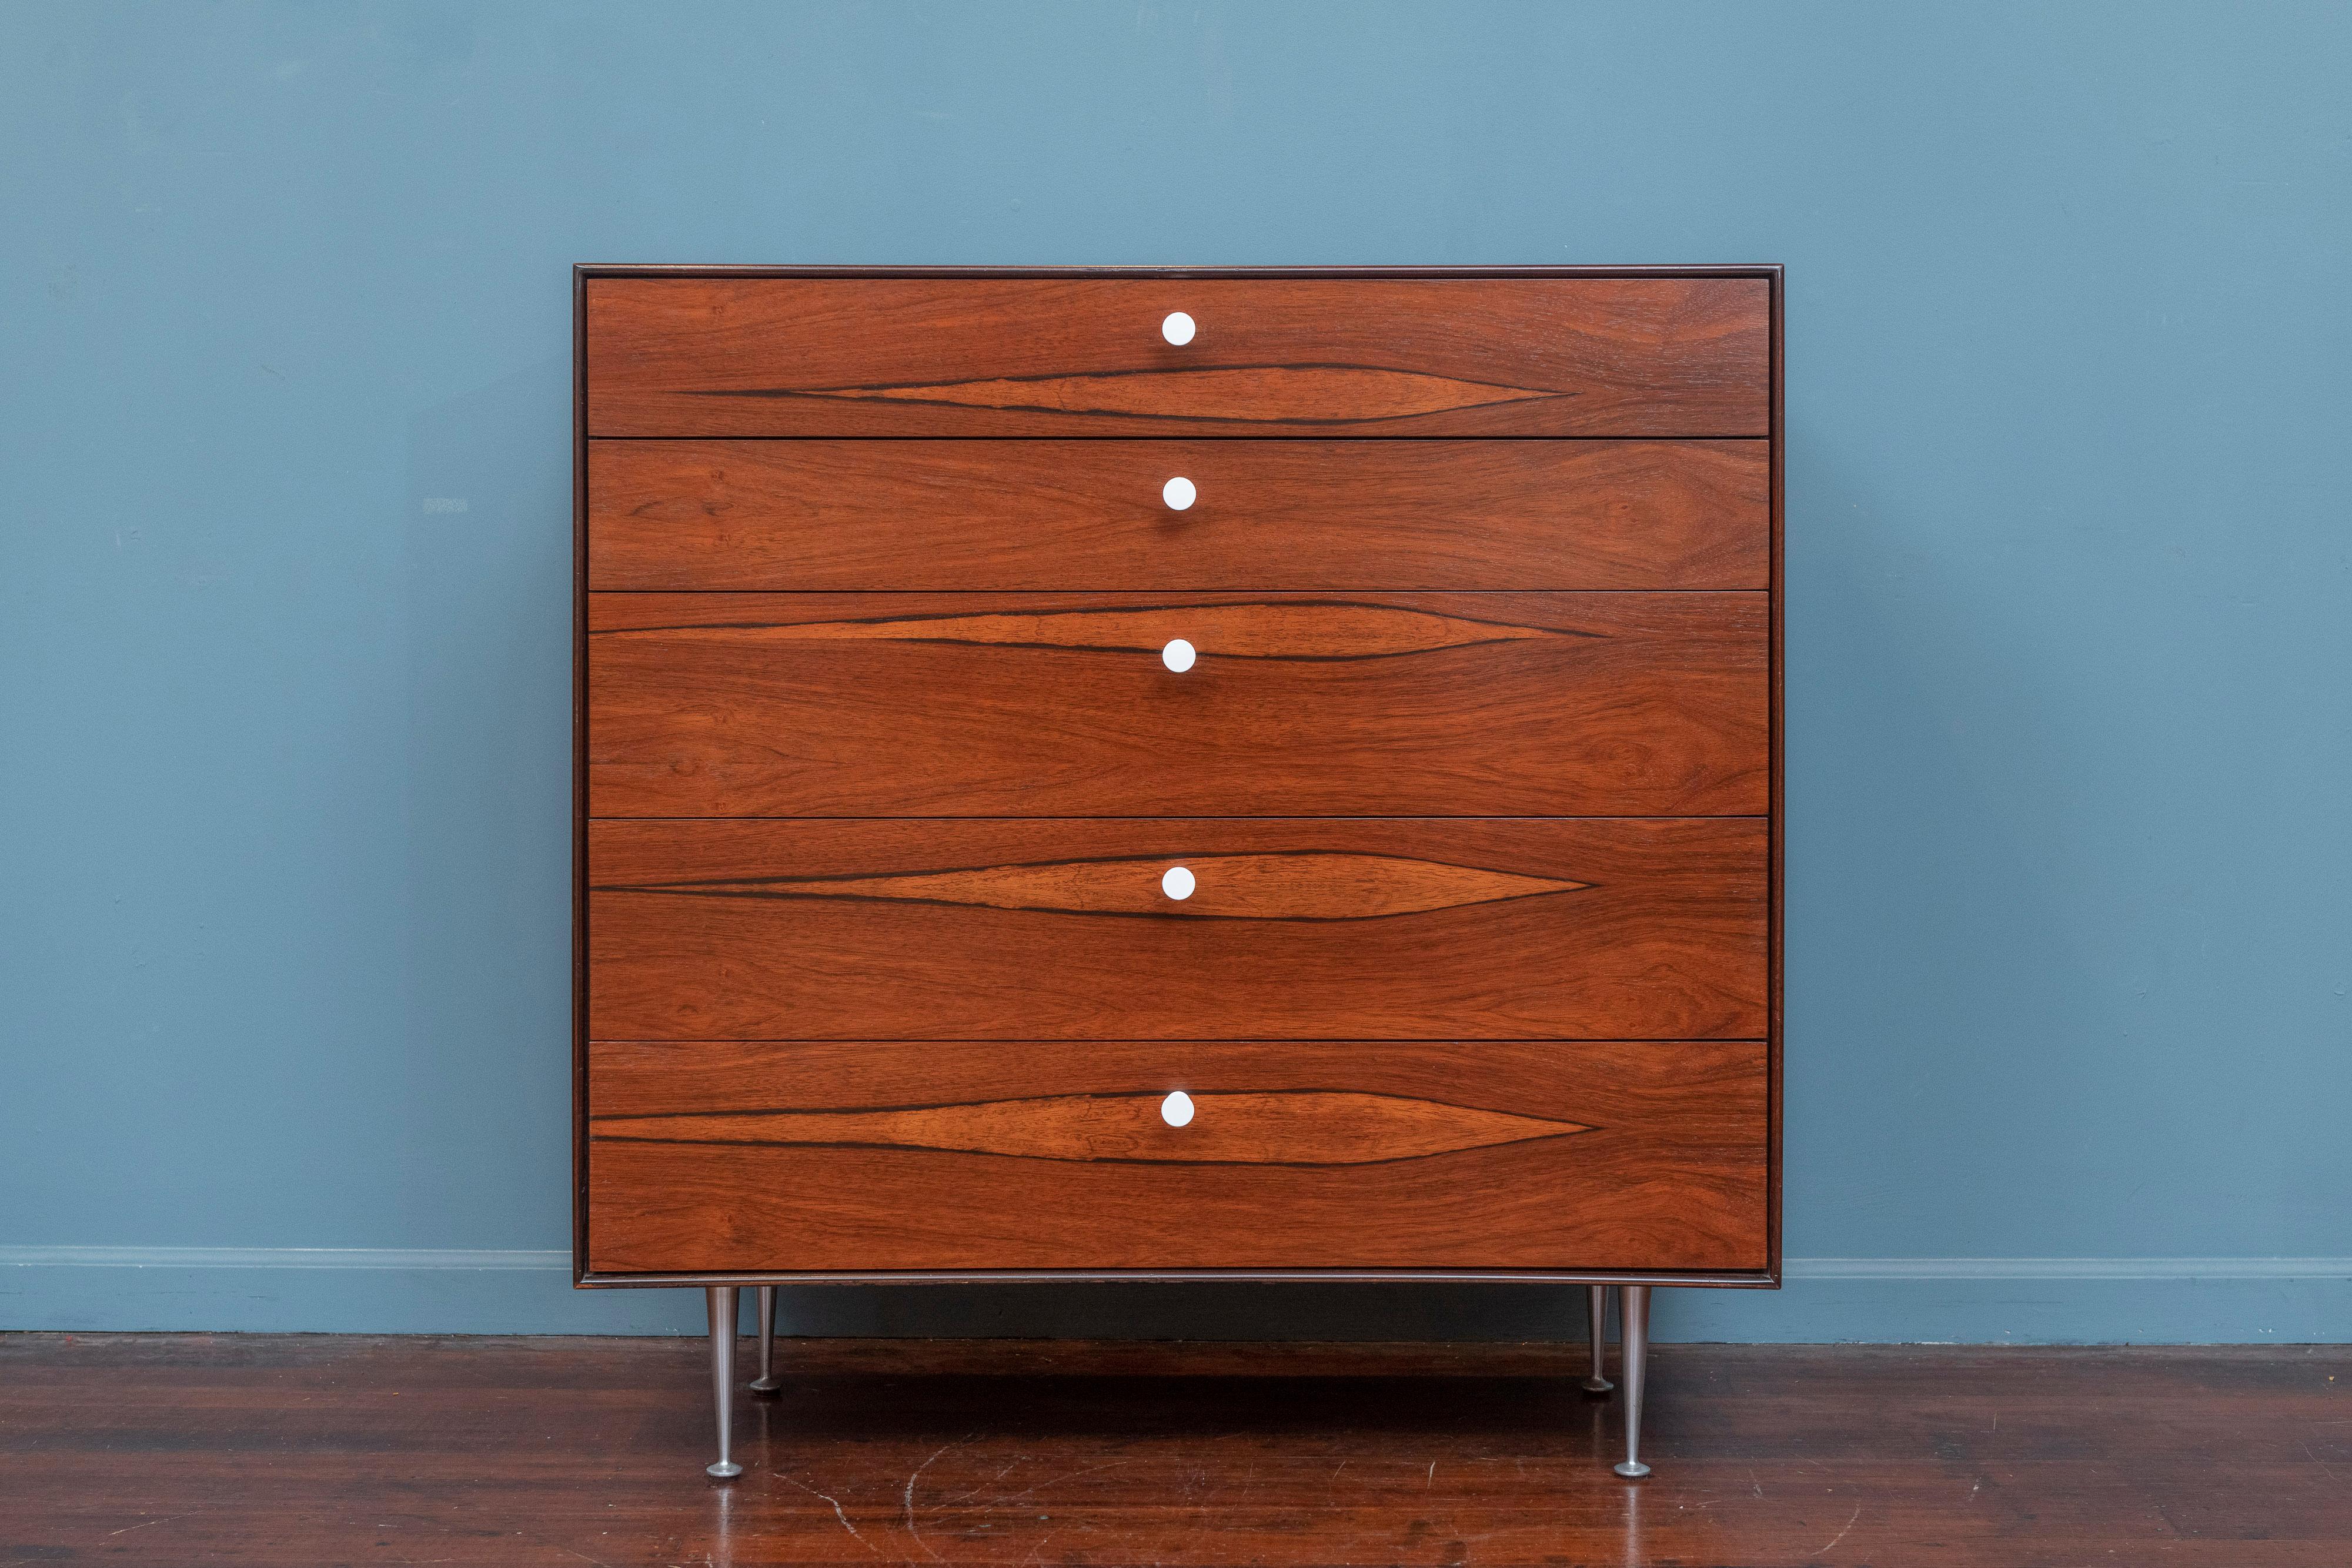 George Nelson design rosewood thin edge tall chest for Herman Miller. Featuring five drawers, two with fitted dividers on aluminum legs and original hourglass pulls. Newly refinished case and drawer fronts with all new drawer runners for smith easy